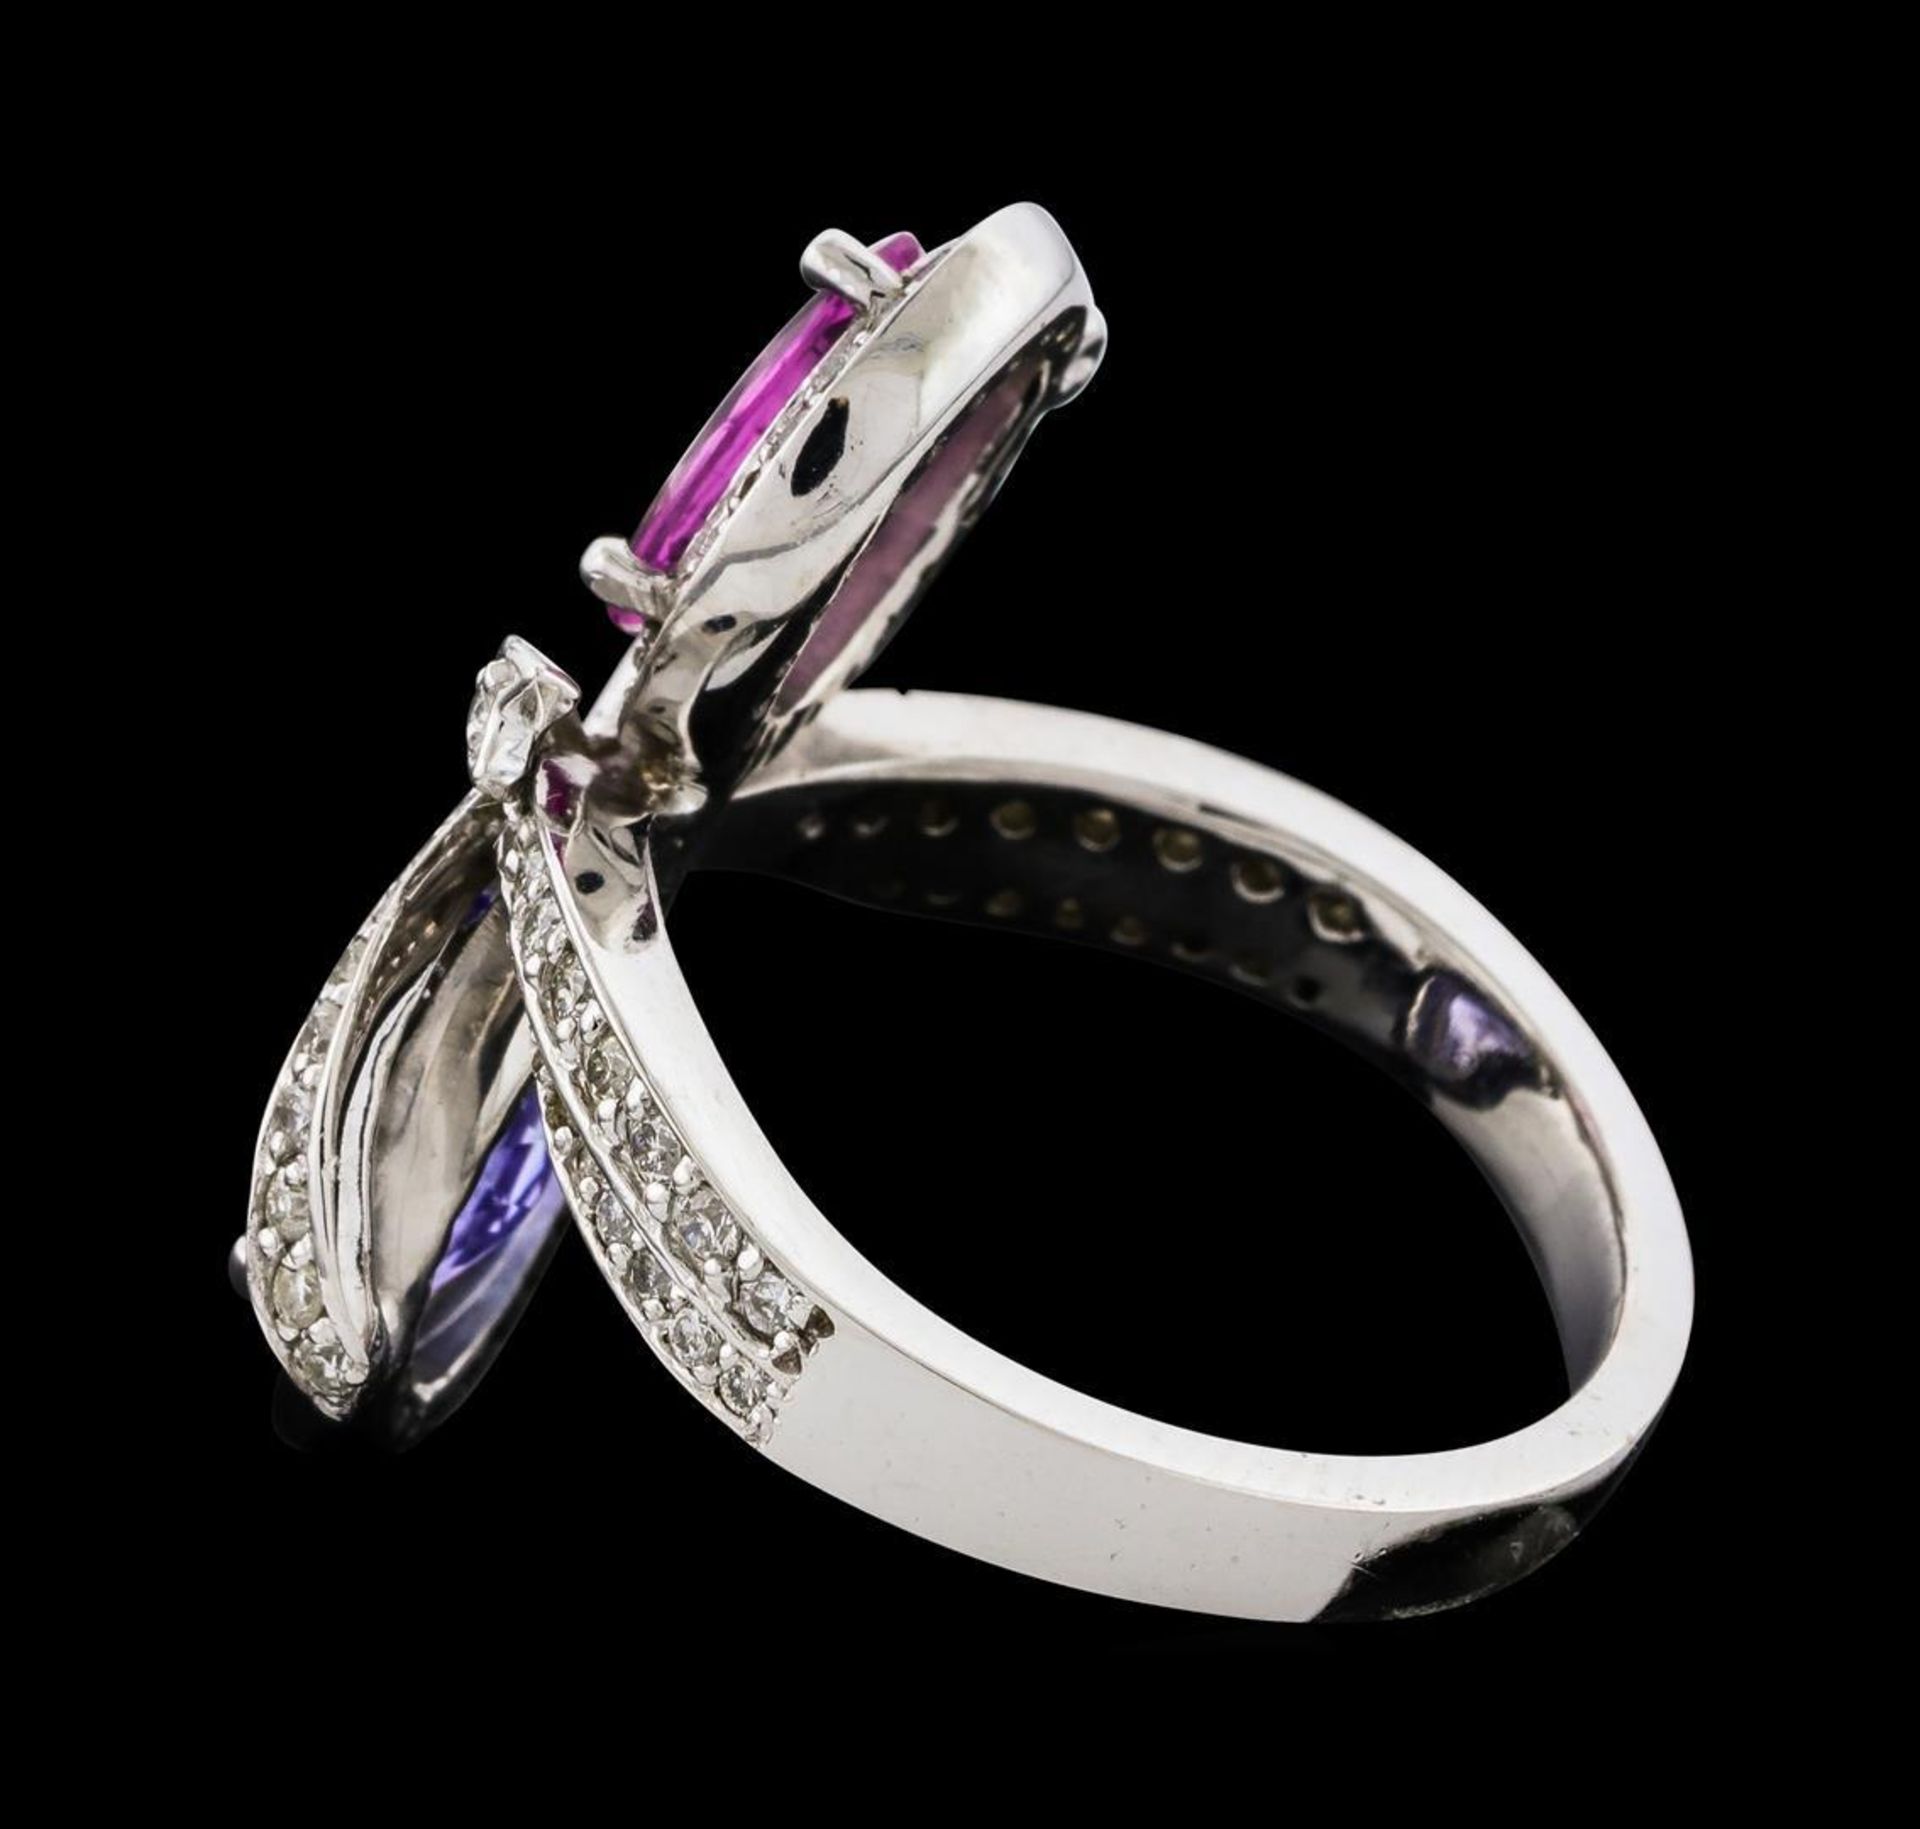 2.55 ctw Tanzanite, Pink Sapphire, and Diamond Ring - 14KT White Gold - Image 3 of 6